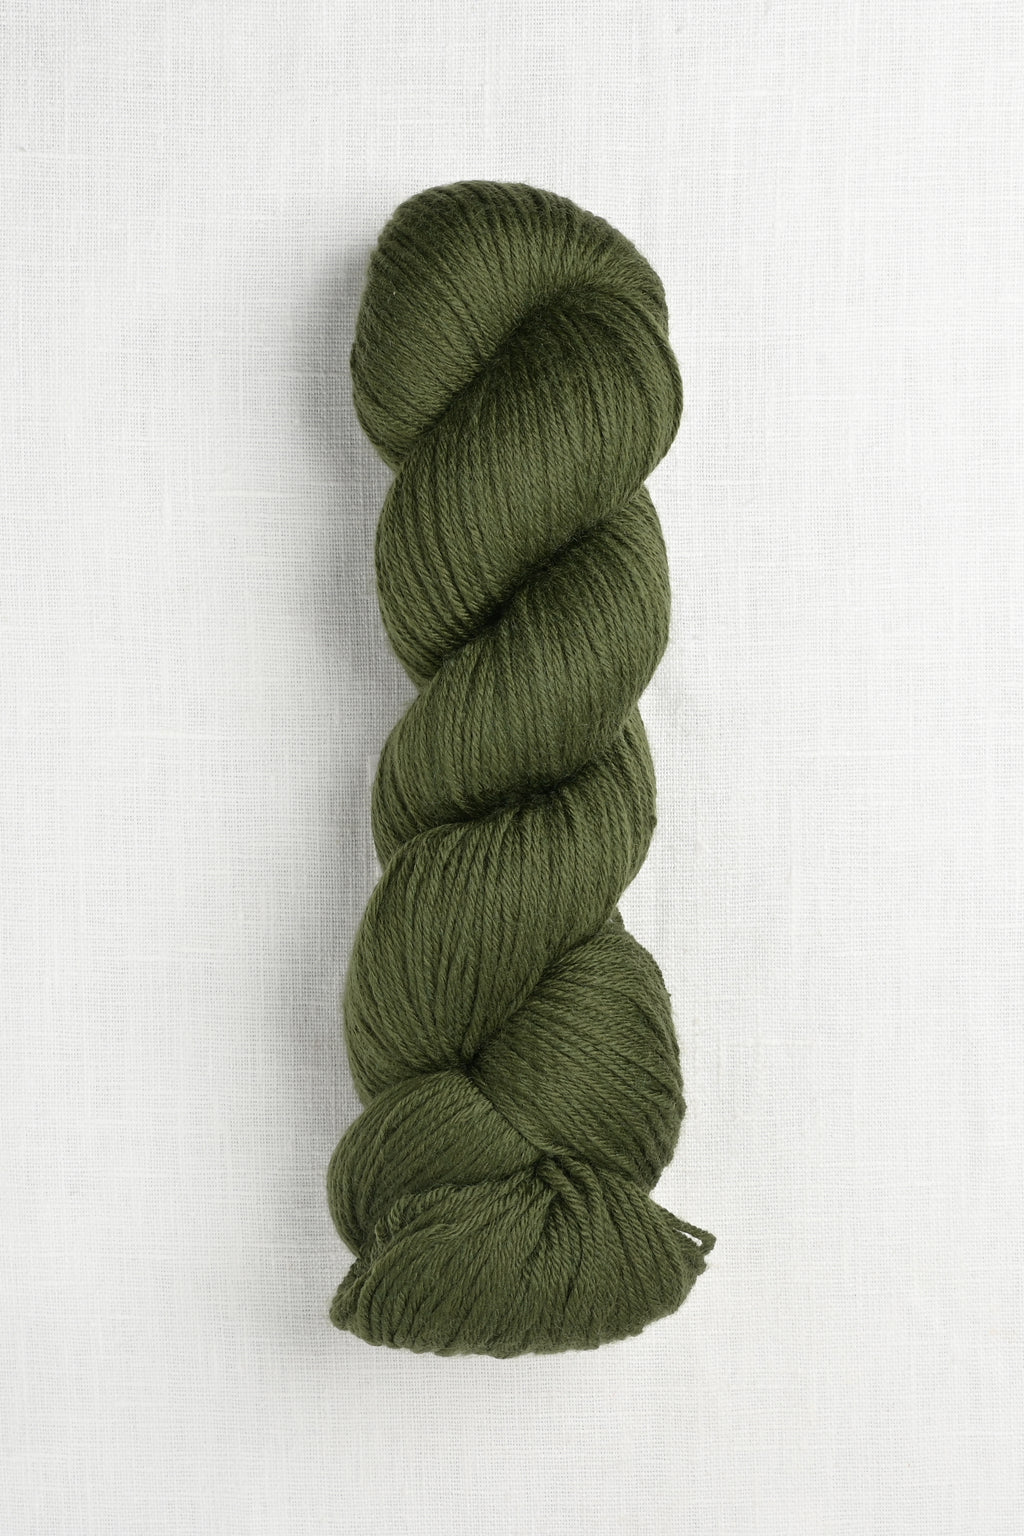 Cascade – Heritage Rock 6 Mossy Company 5634 and Wool